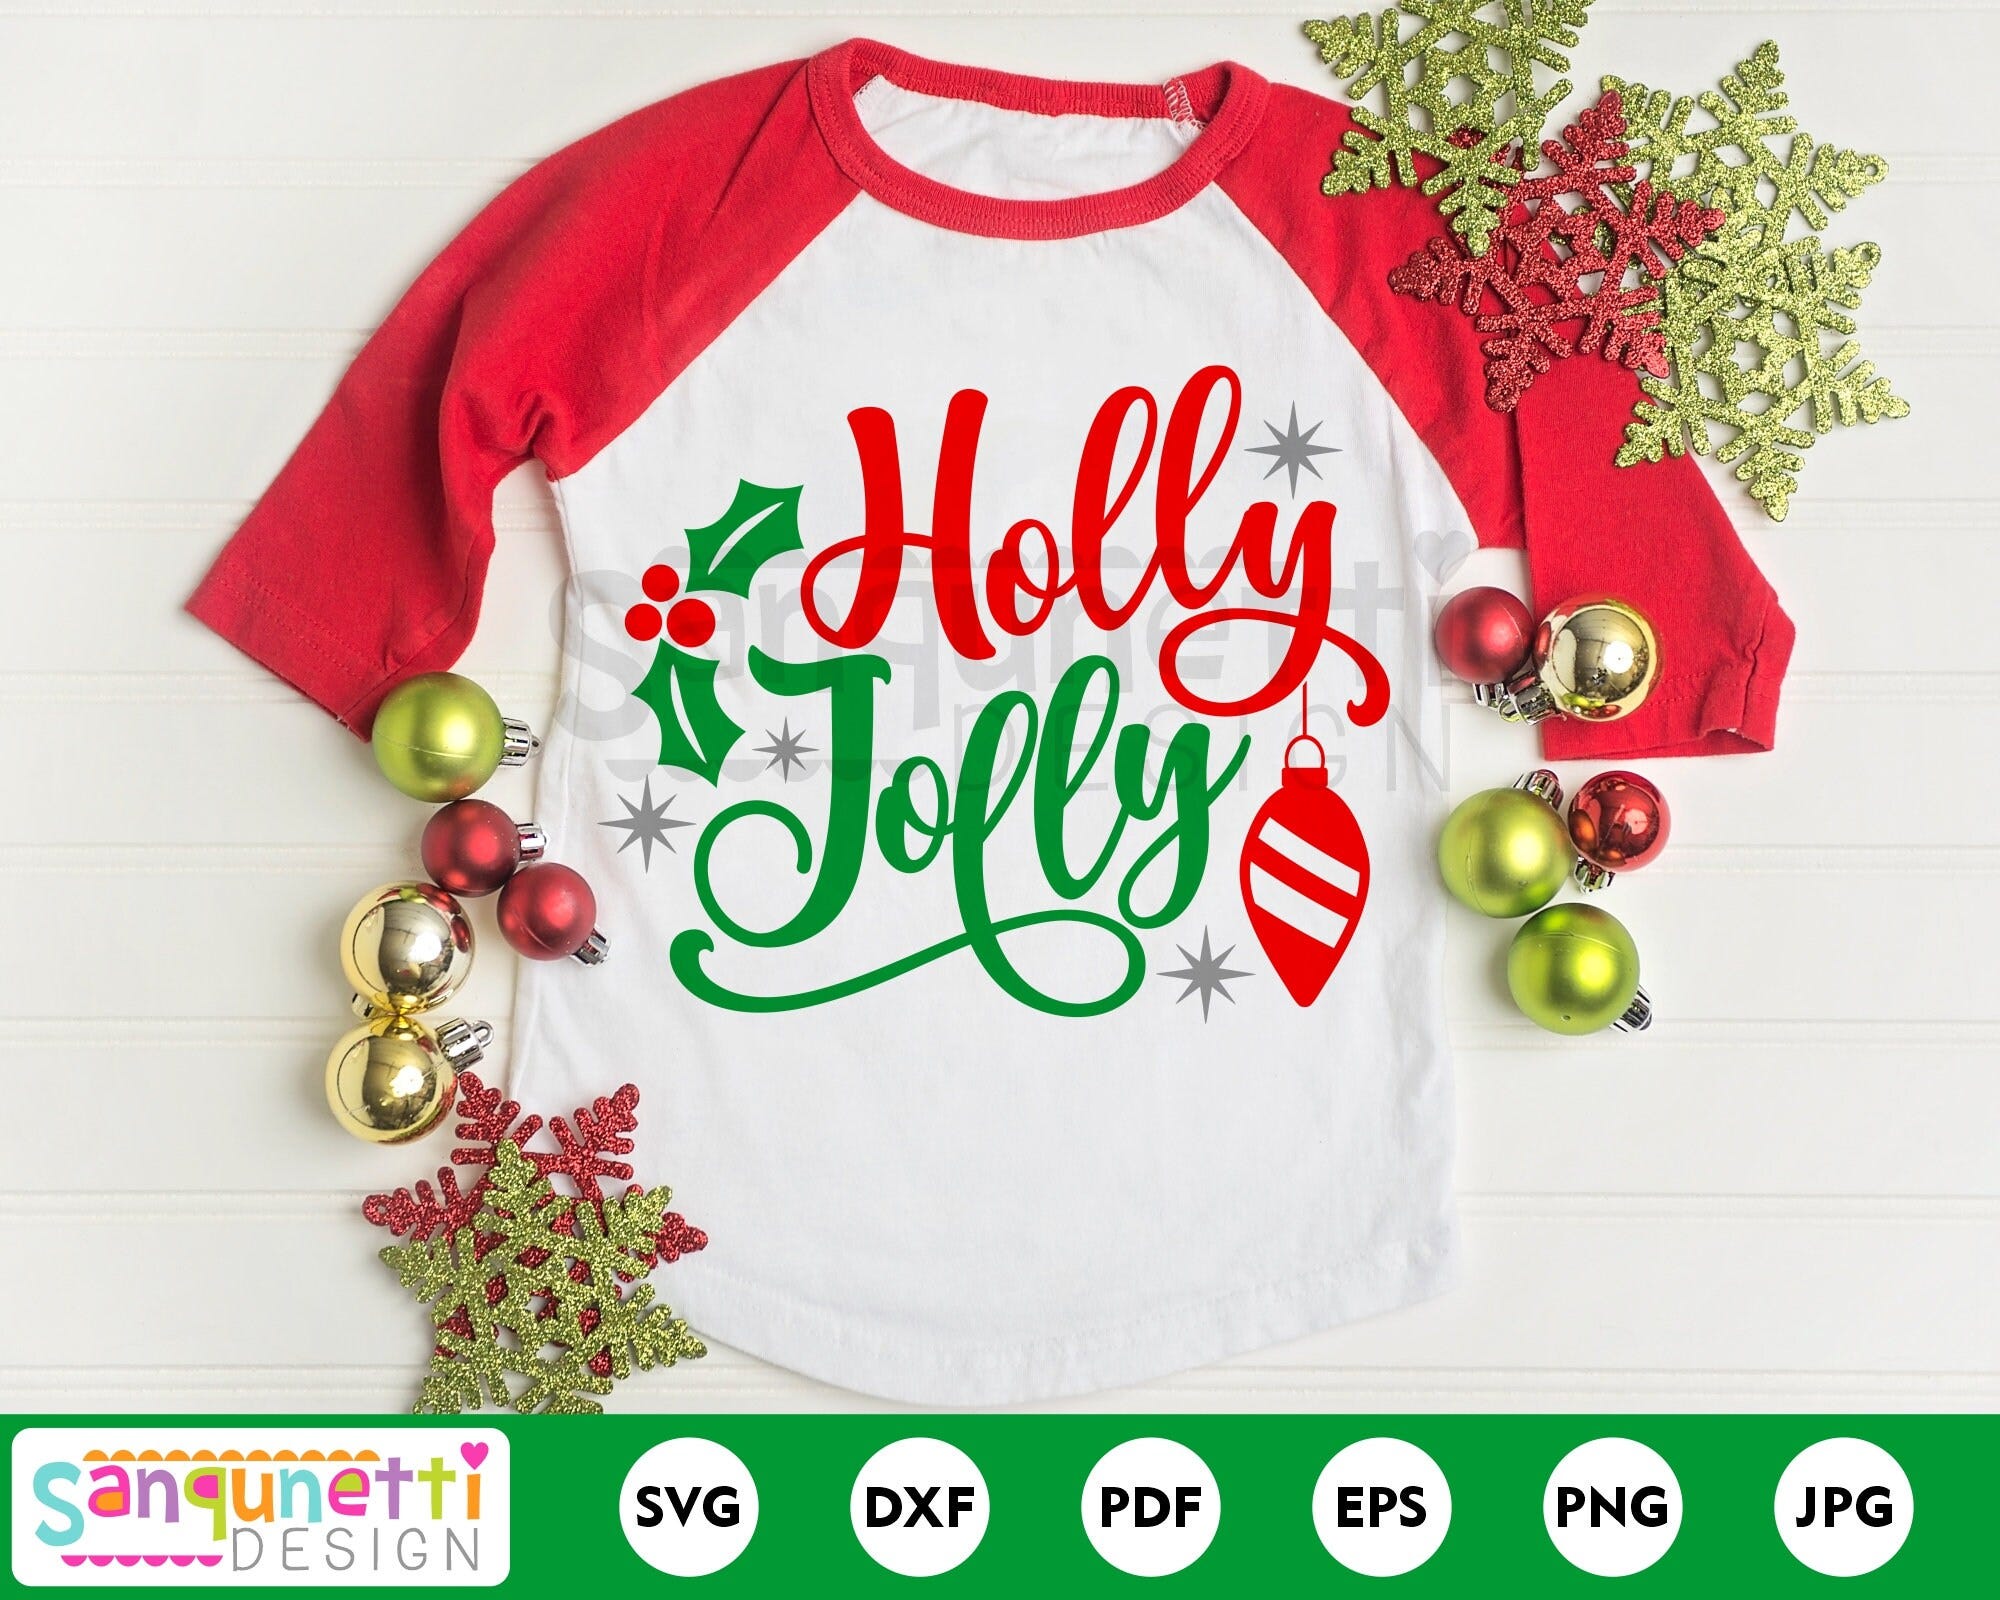 Holly Jolly Christmas SVG, Holiday song svg, Christmas cut file, silhouette and cricut